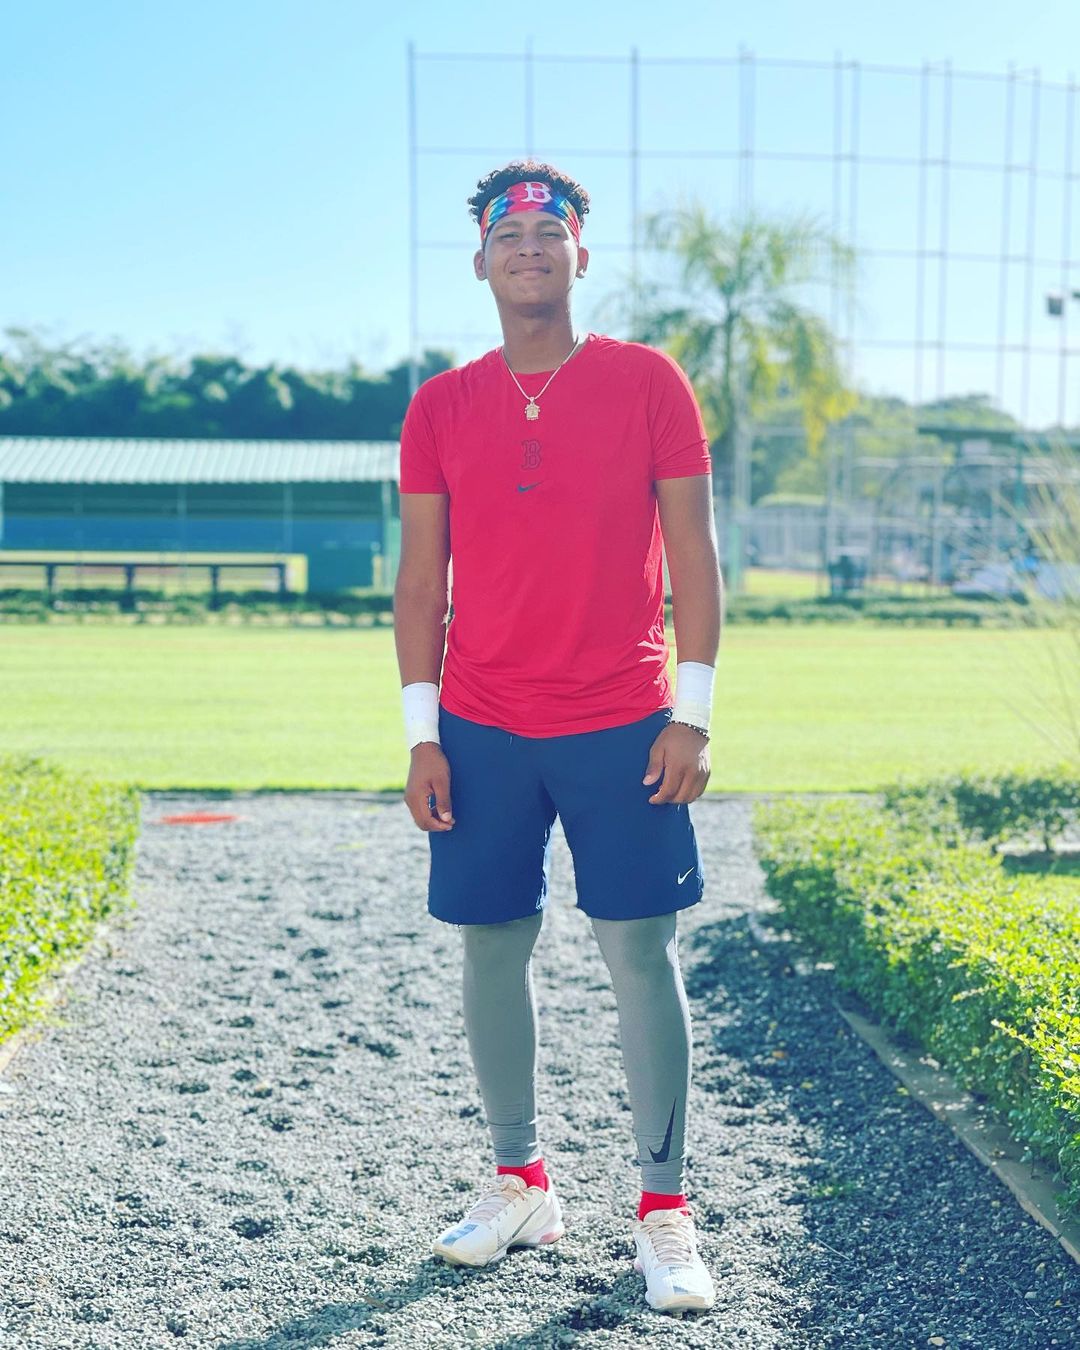 Red Sox catching prospect Enderso Lira ‘showed promise both offensively and defensively’ in Dominican Summer League last year